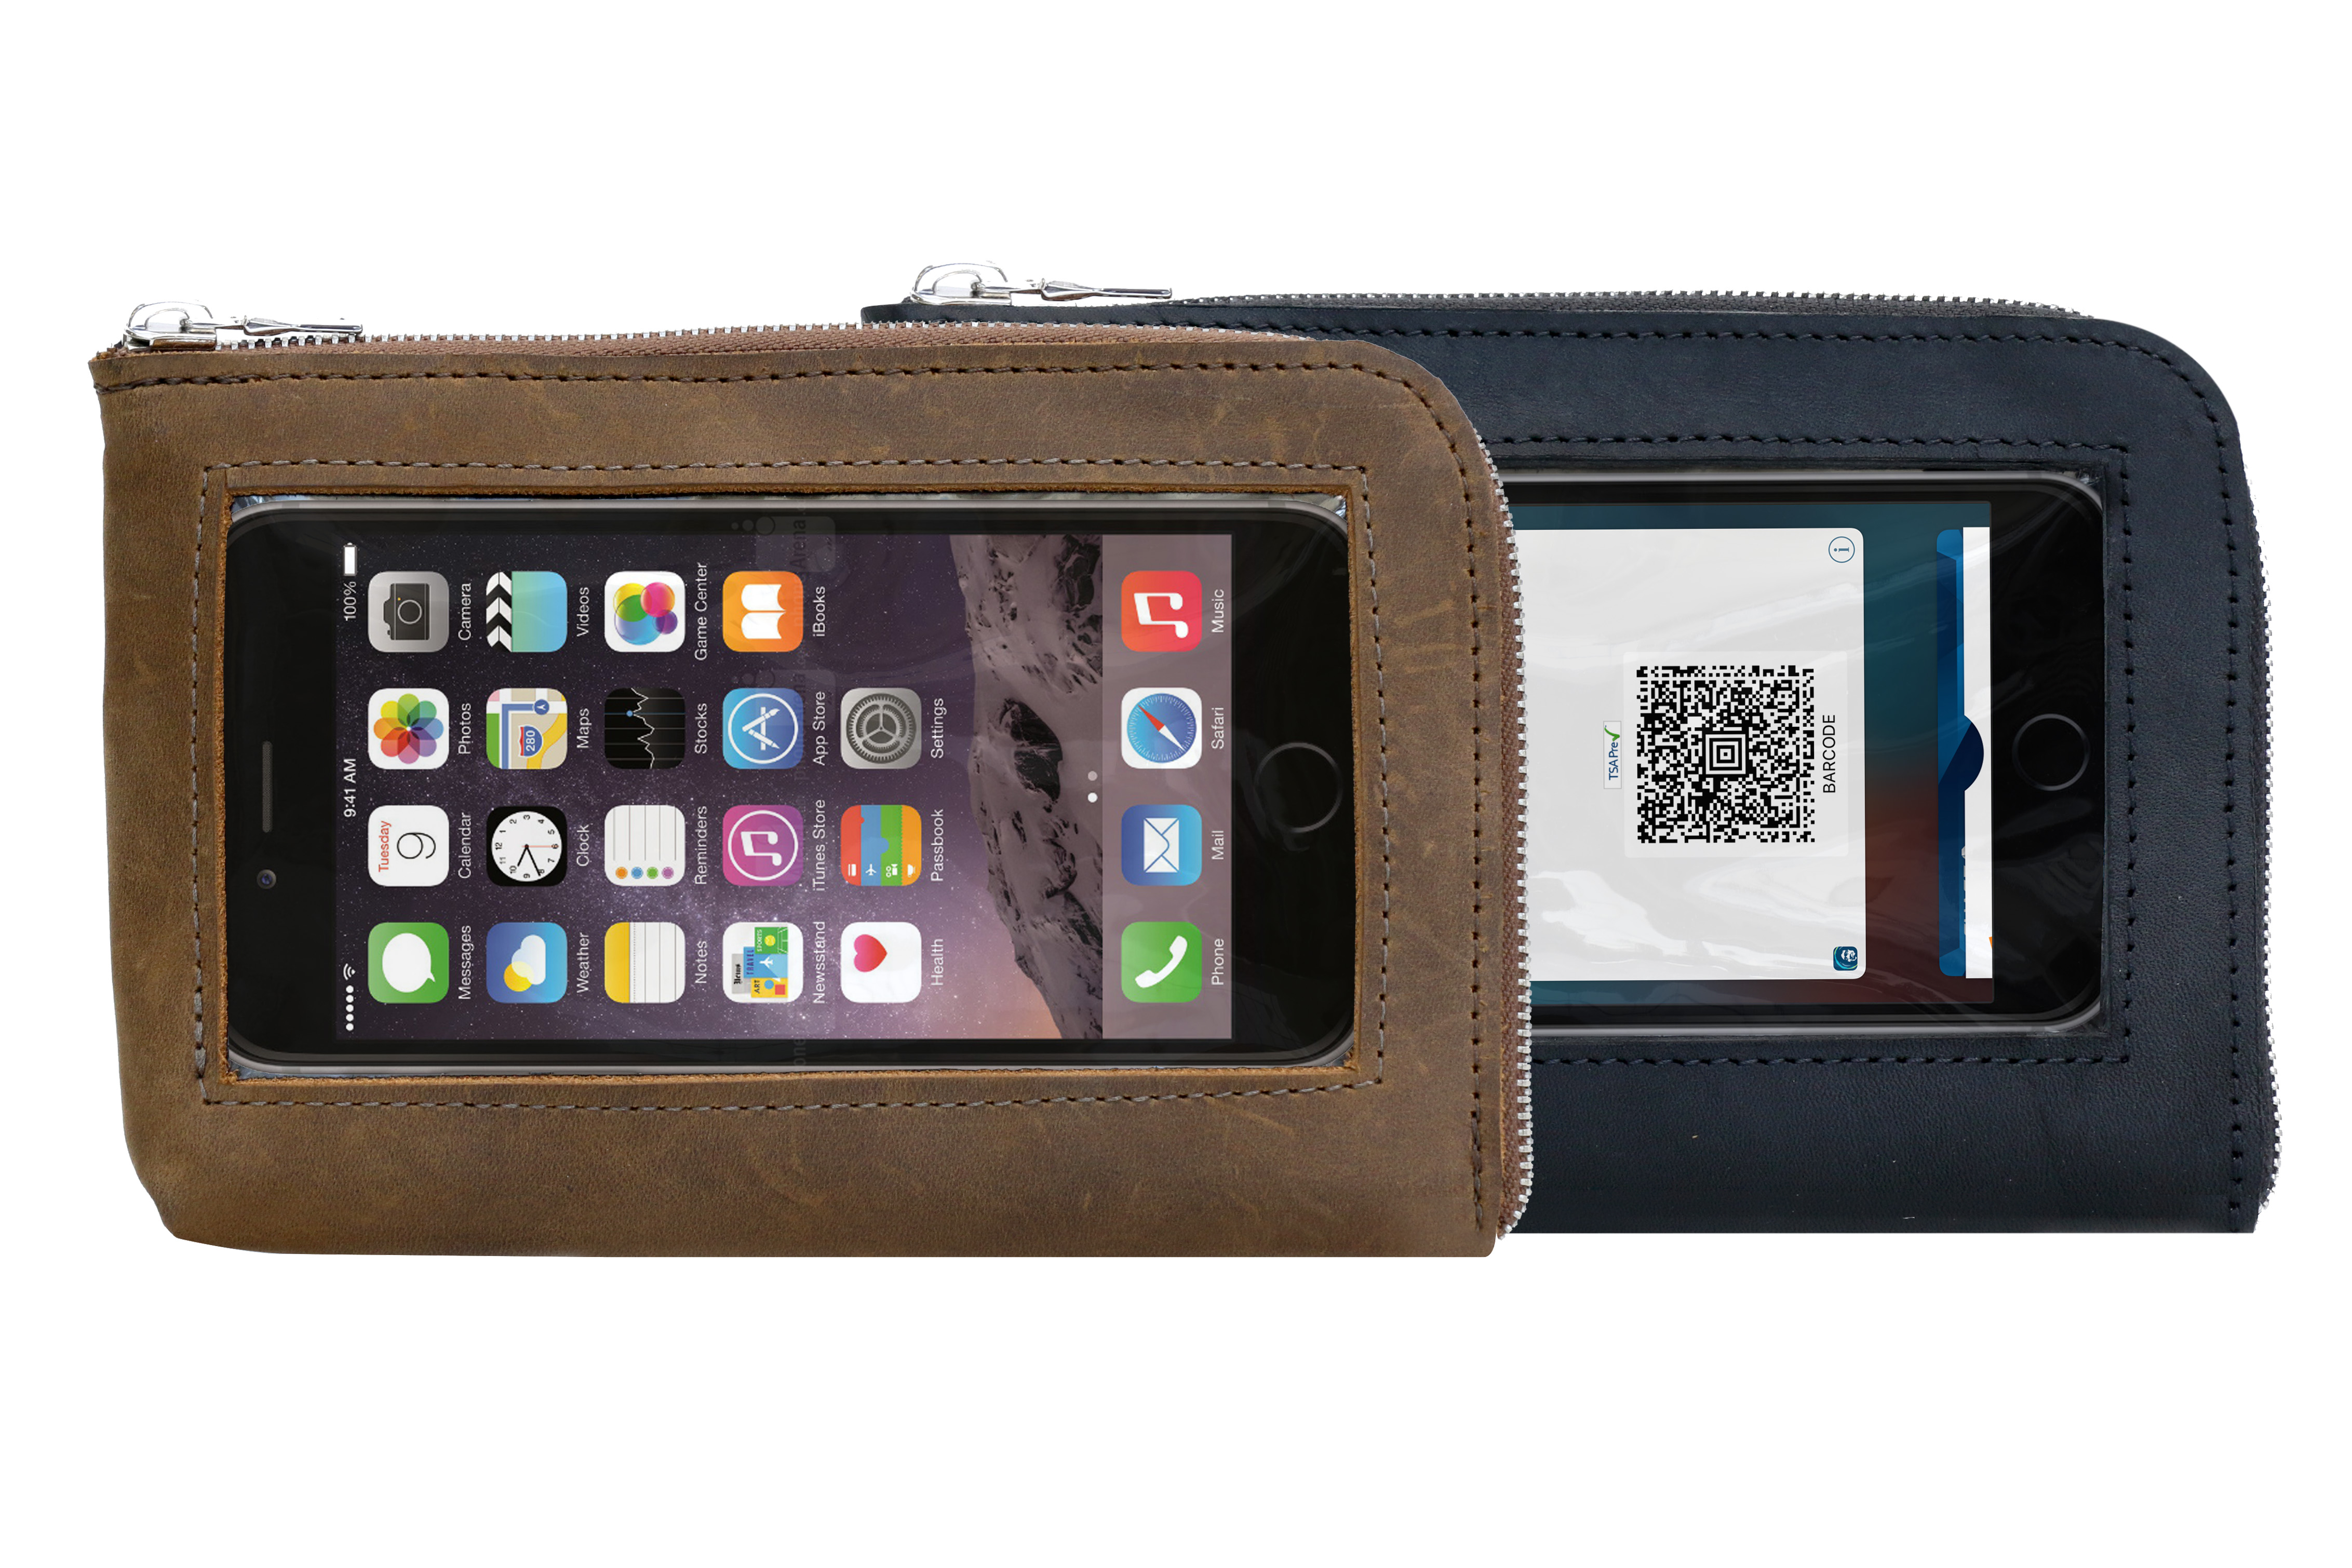 The Intrepid iPhone Travel Wallet